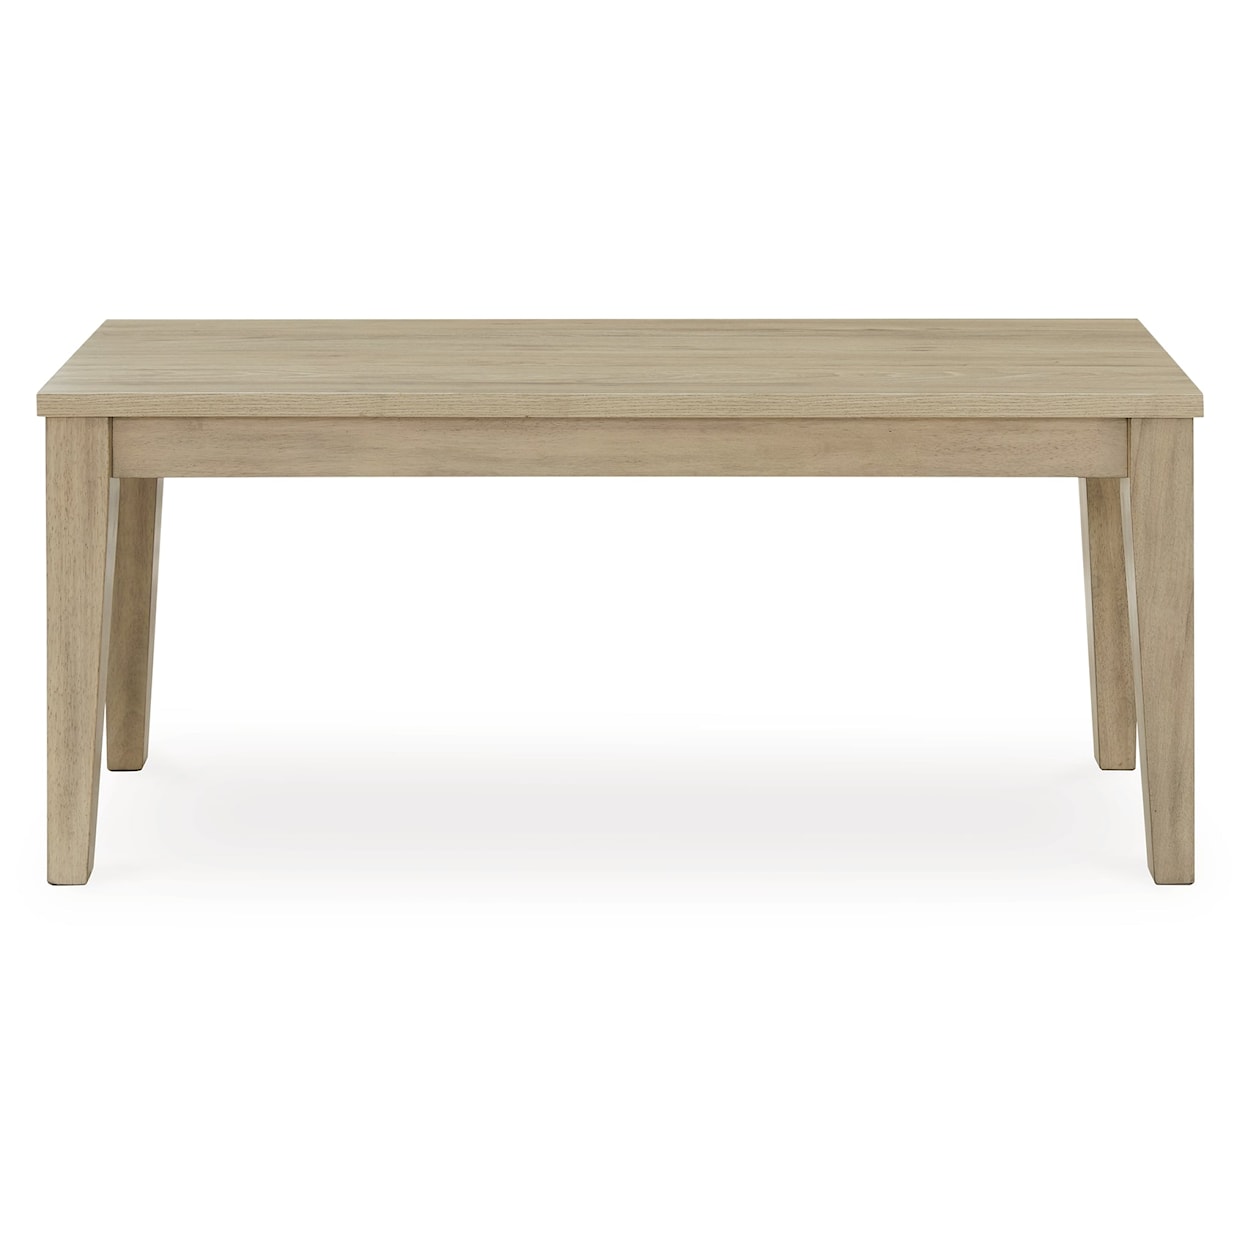 Signature Gleanville Dining Bench